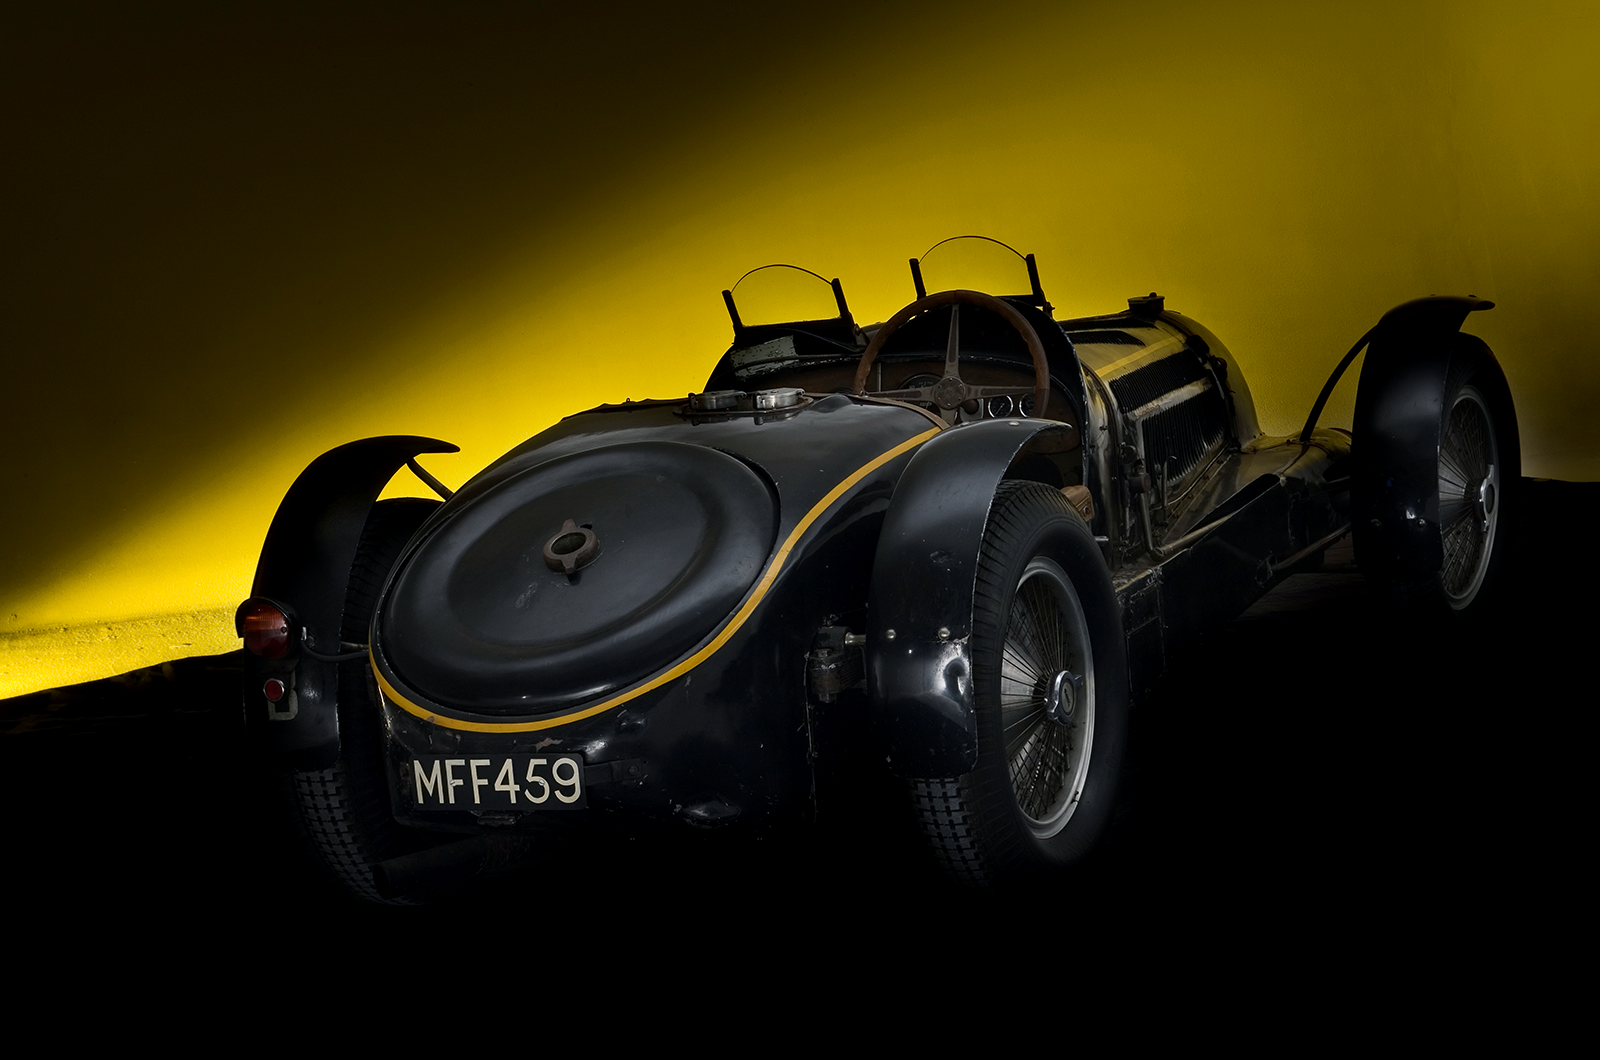 Classic & Sports Car – Stunningly original, this royal ex-works Bugatti could top £10m